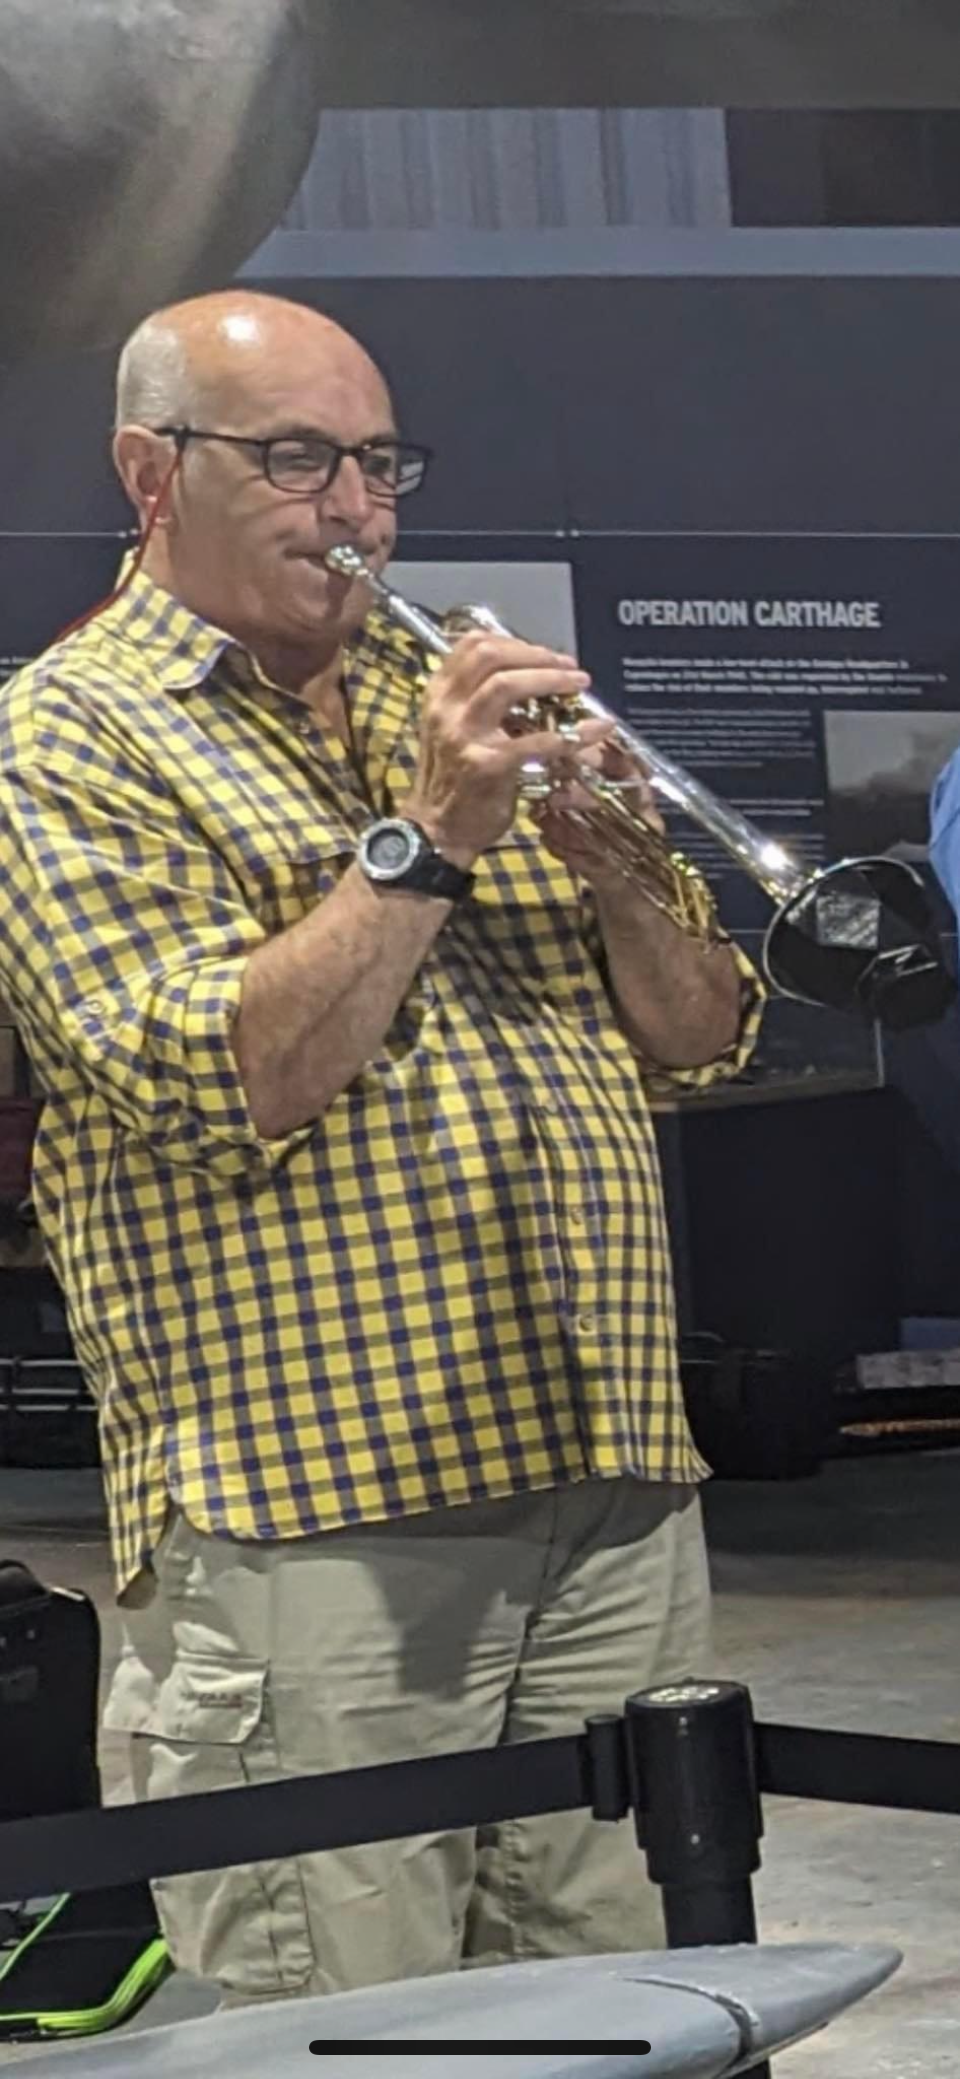 A white man, bald on top, plays a trumpet